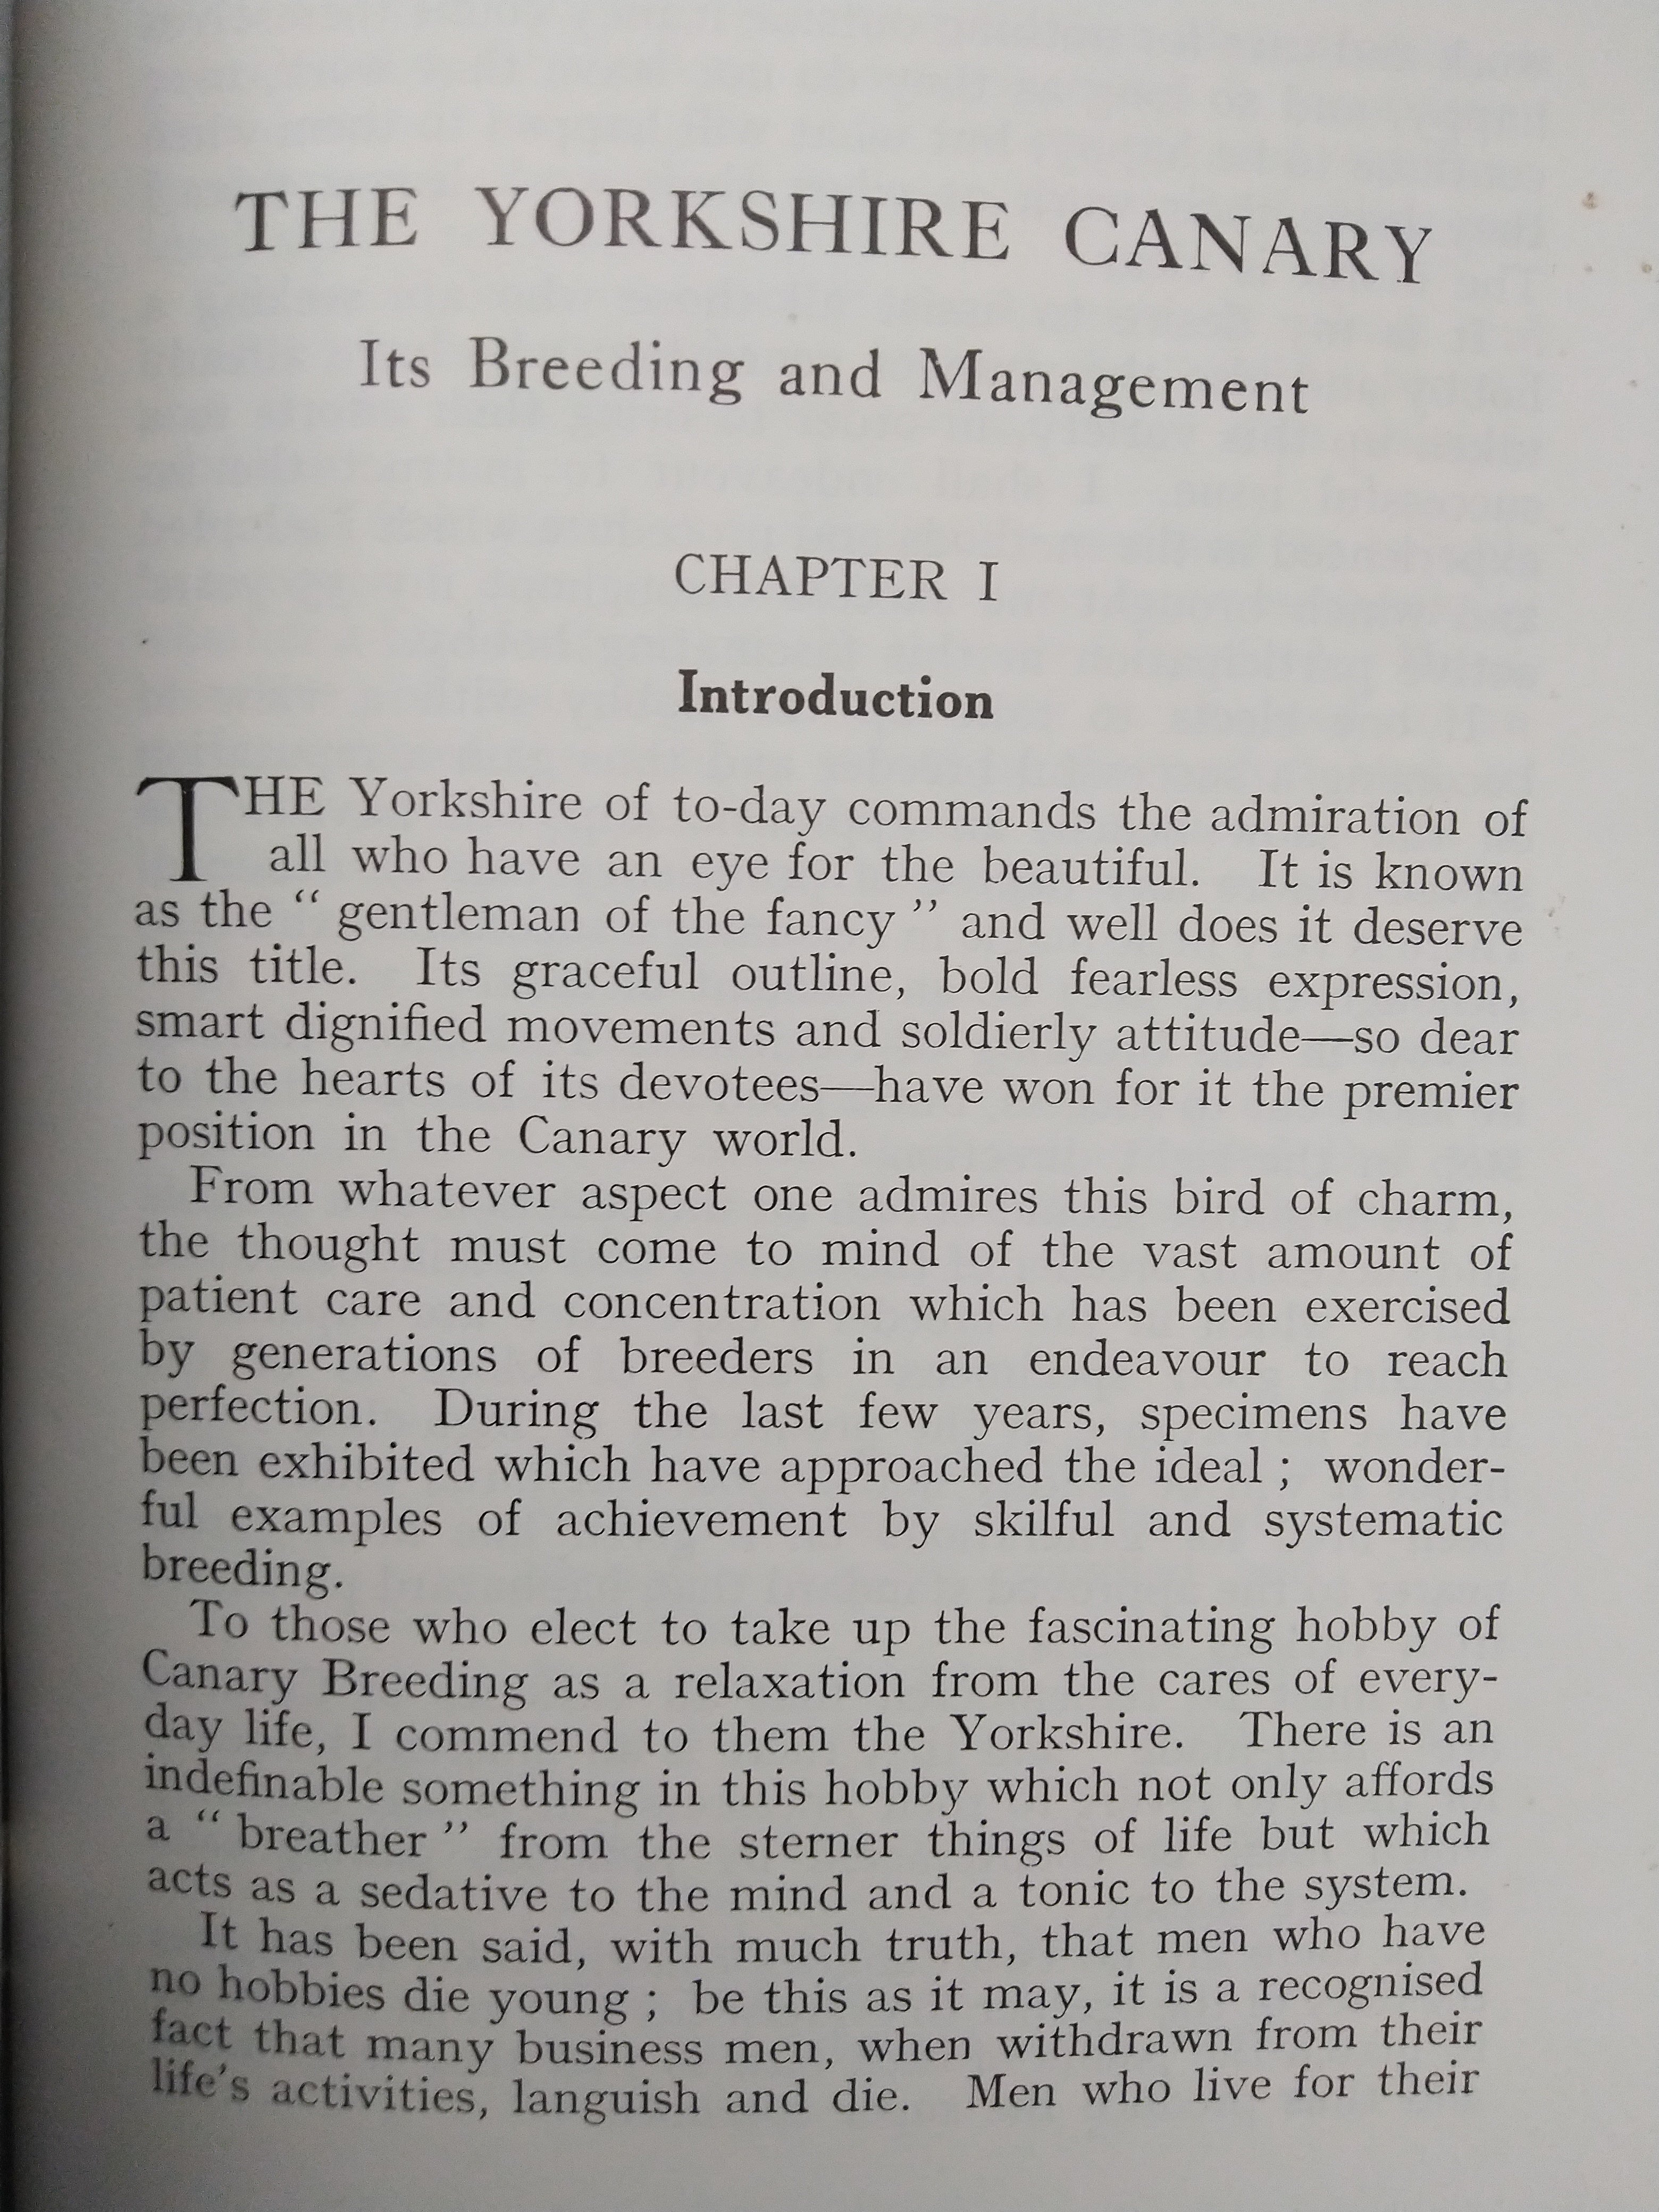 Shackleton's Yorkshire Canary Revised by W. E. Brooks and William Henry